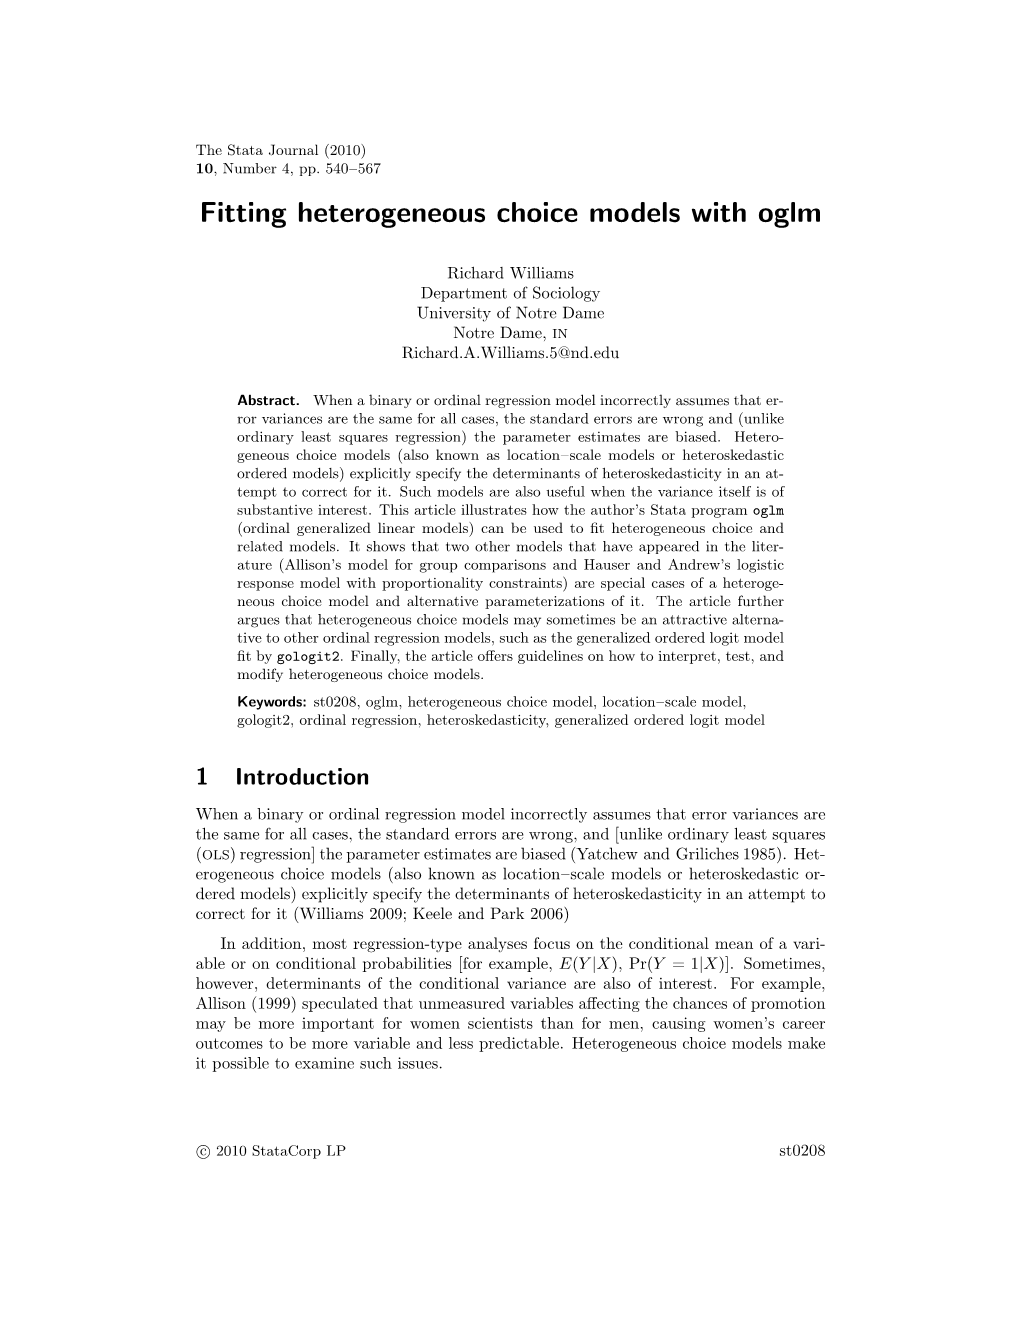 Fitting Heterogeneous Choice Models with Oglm